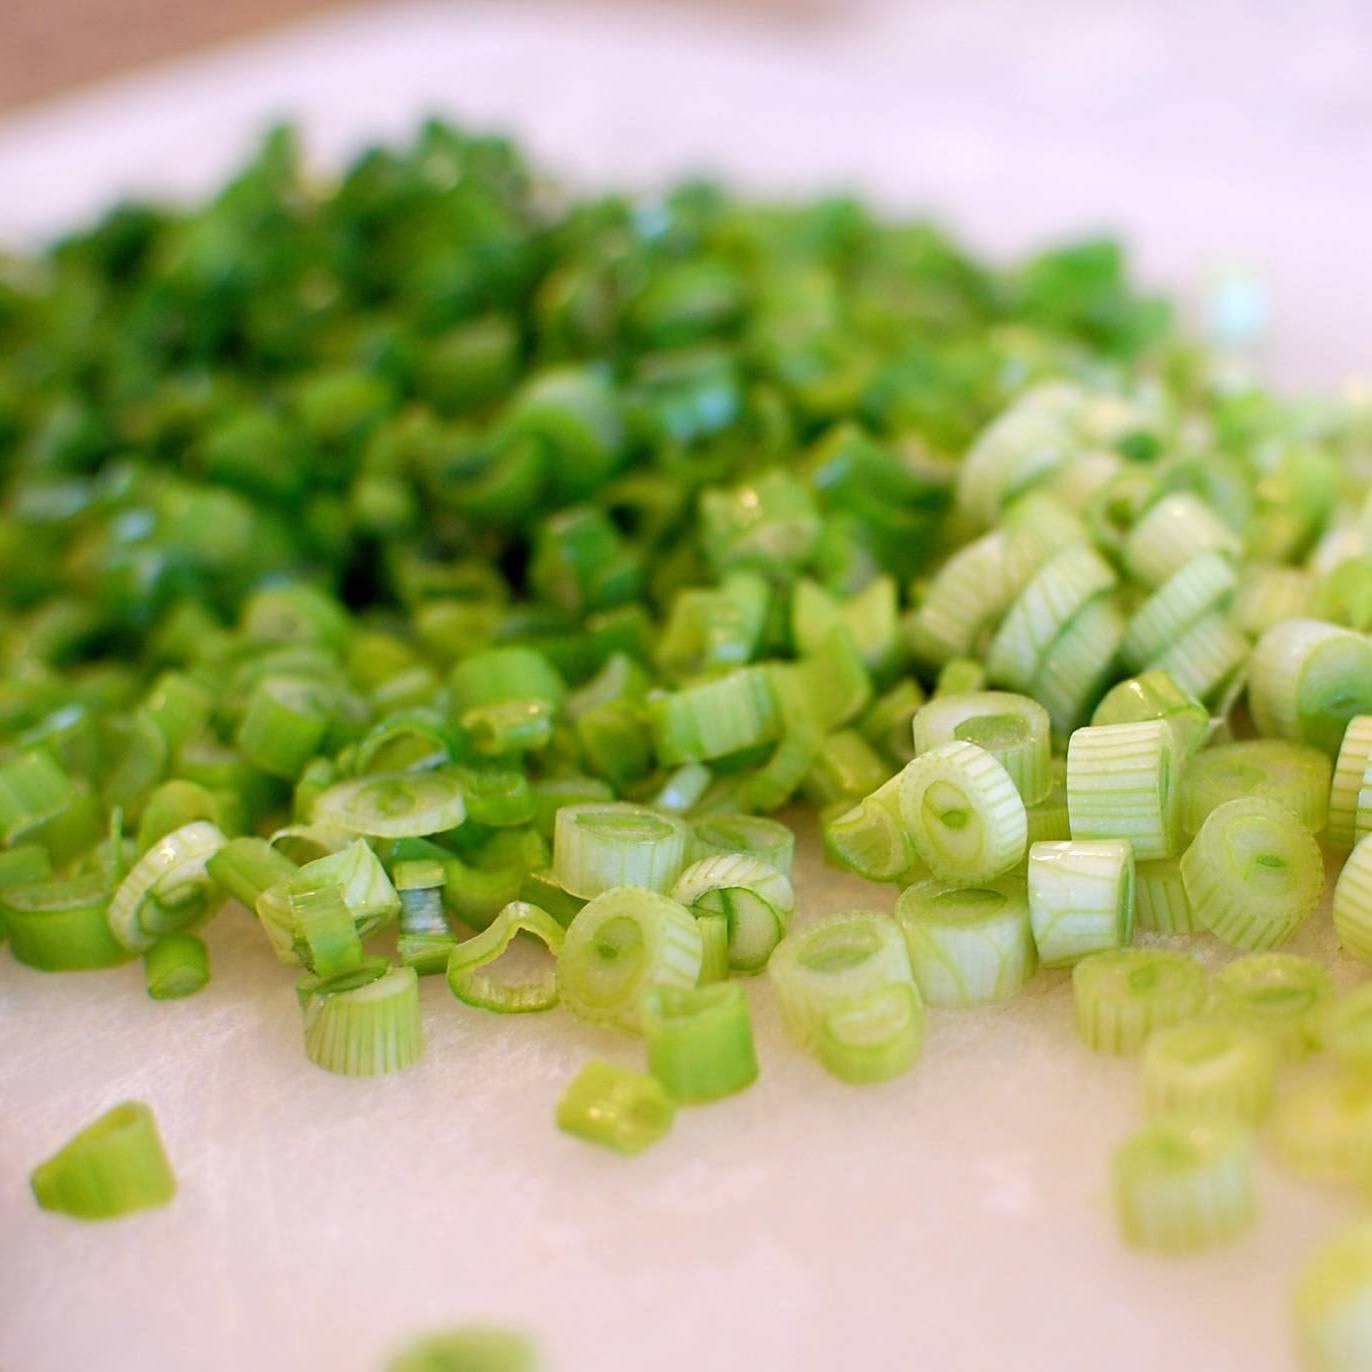 https://thechinaproject.com/wp-content/uploads/2020/07/Green-onions-2.jpg